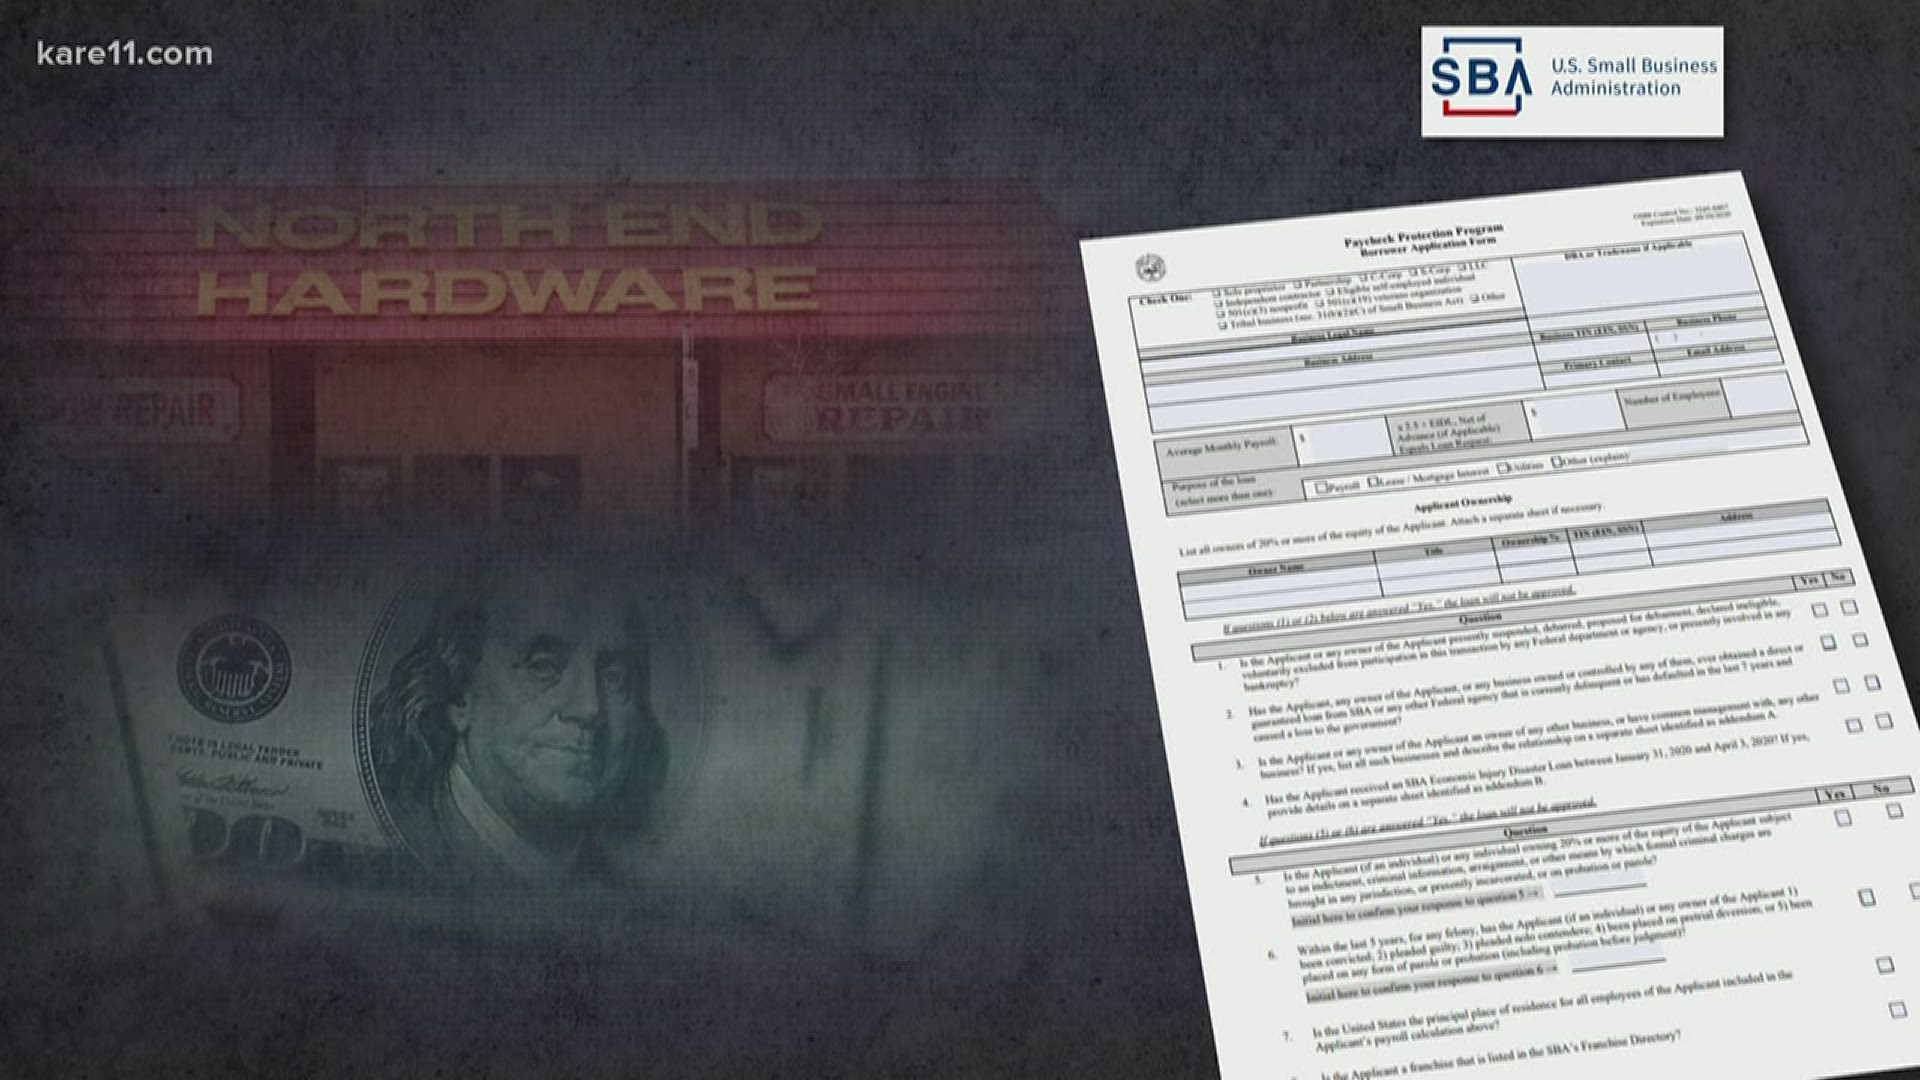 Hackers are attempting to steal newly-approved SBA loans by using fake emails to businesses and banks trying to redirect deposits to other accounts.